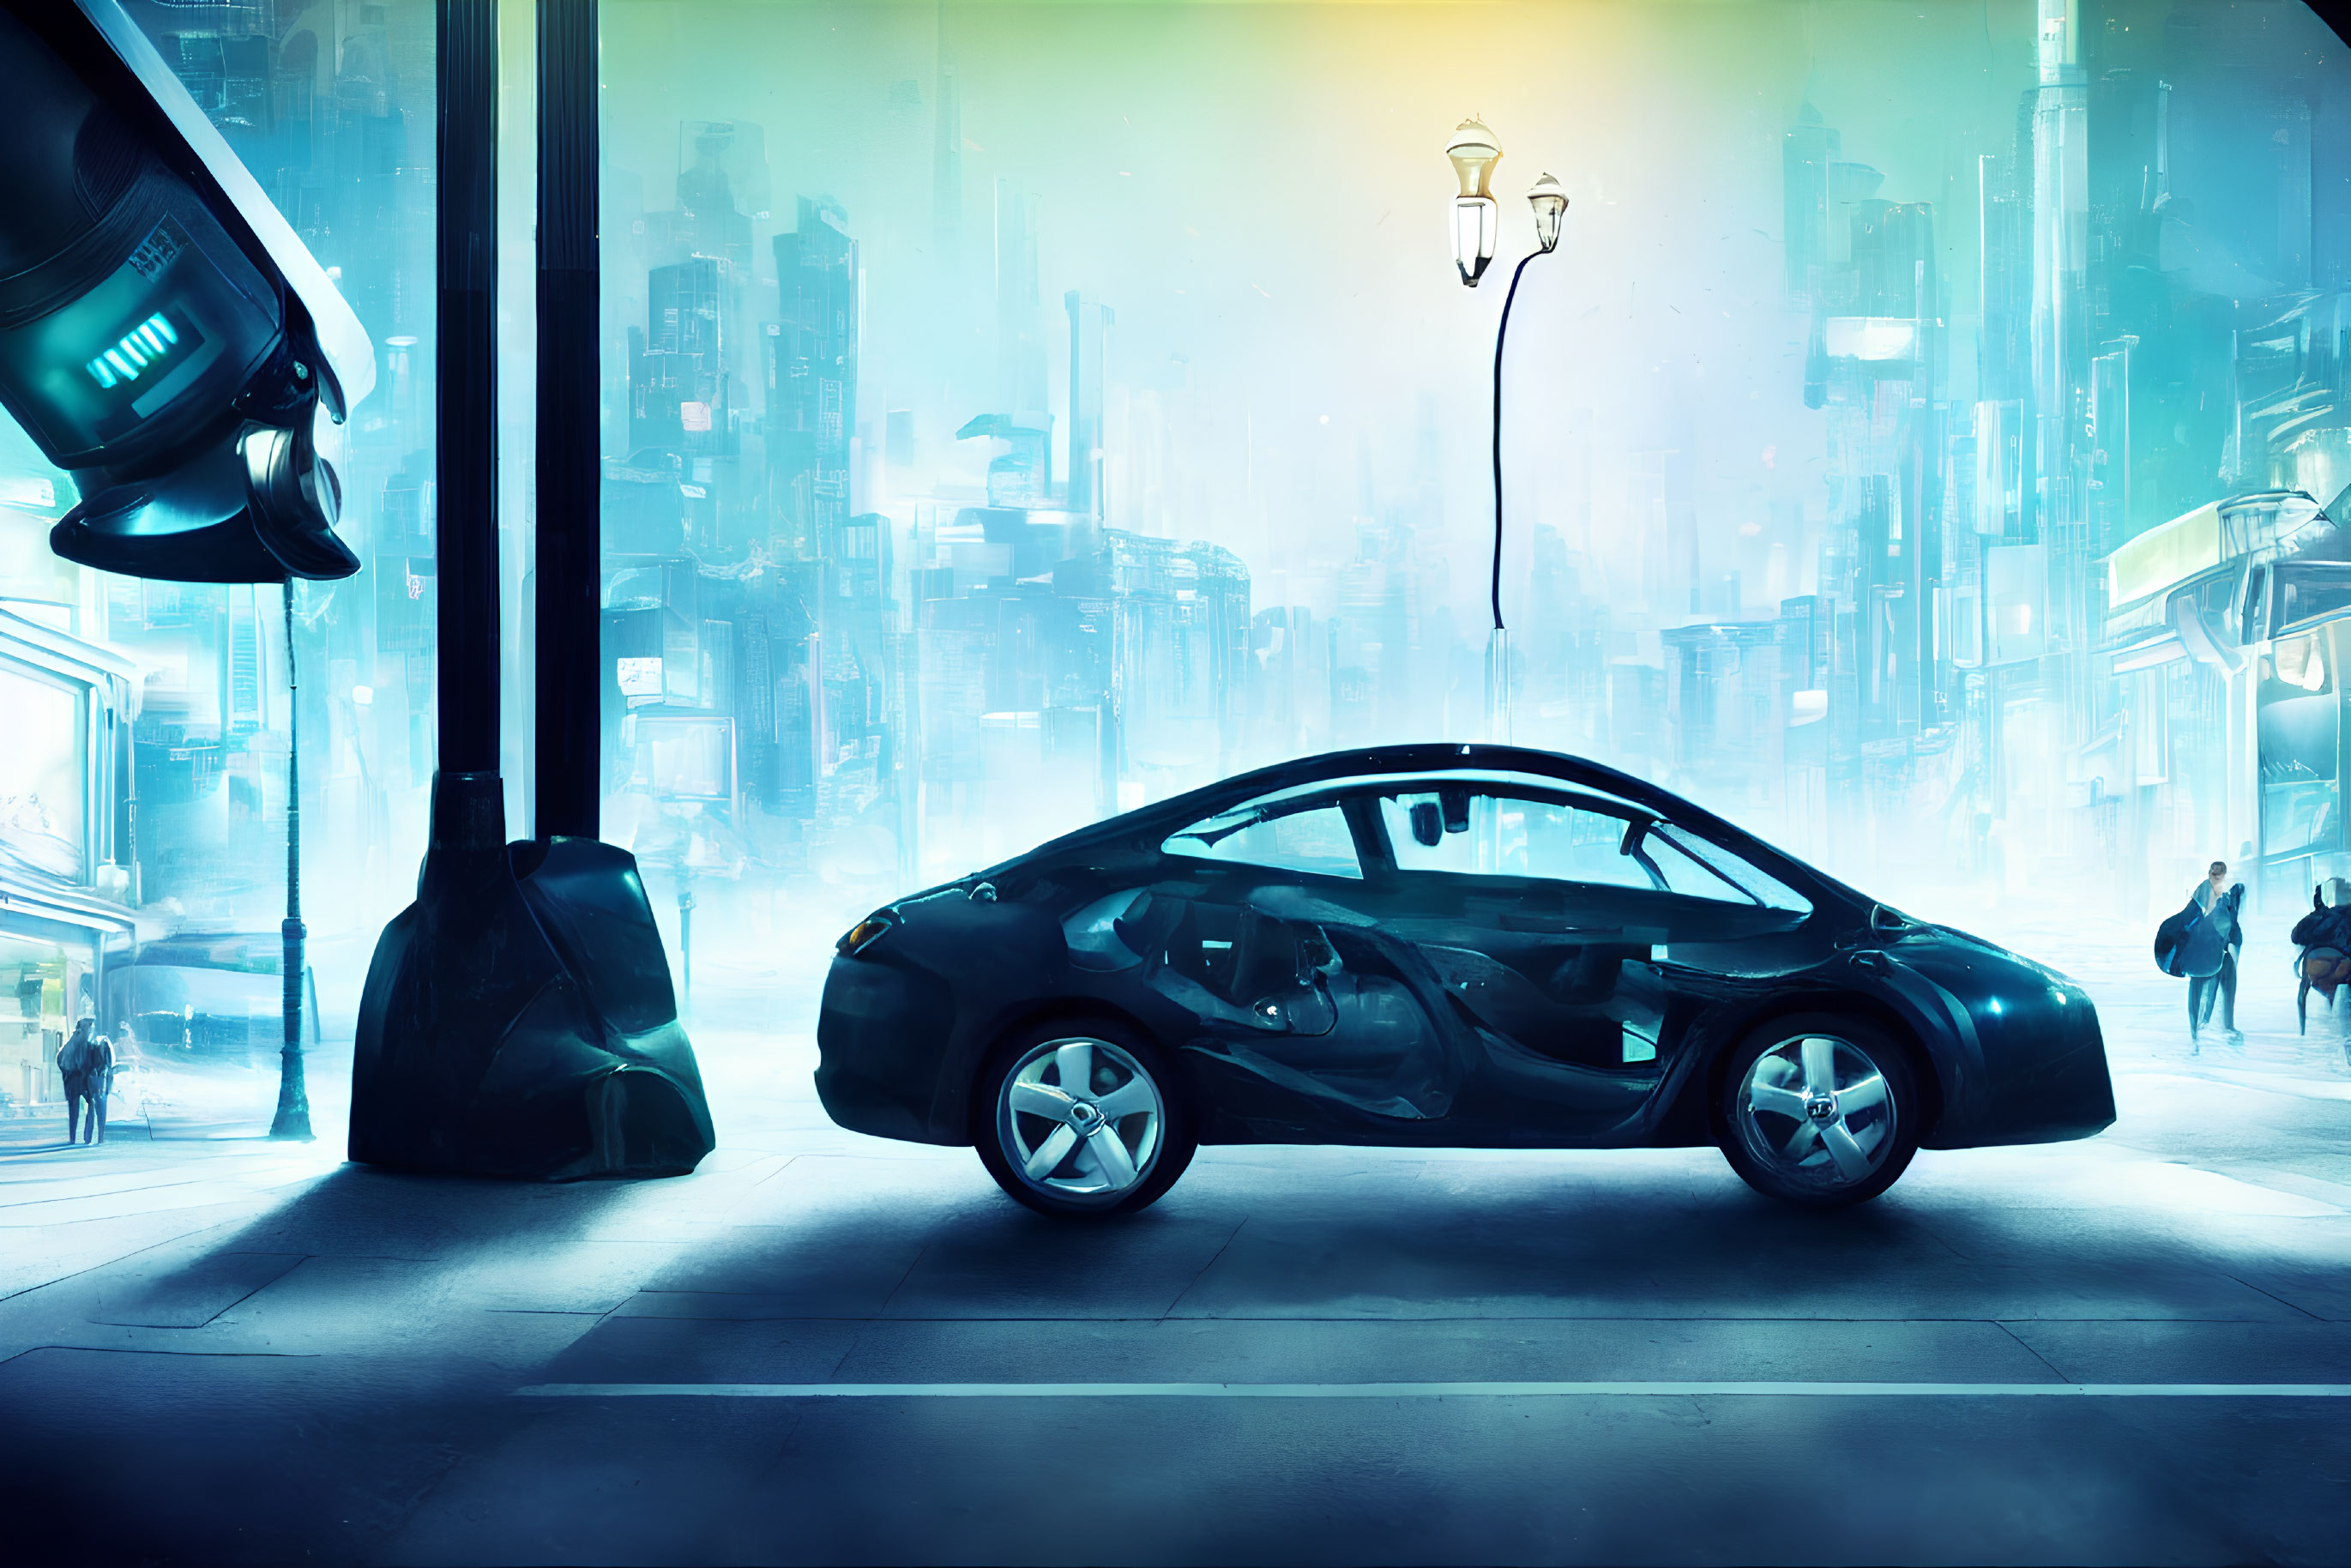 Futuristic cityscape with black car, turquoise glow, towering buildings, and robot